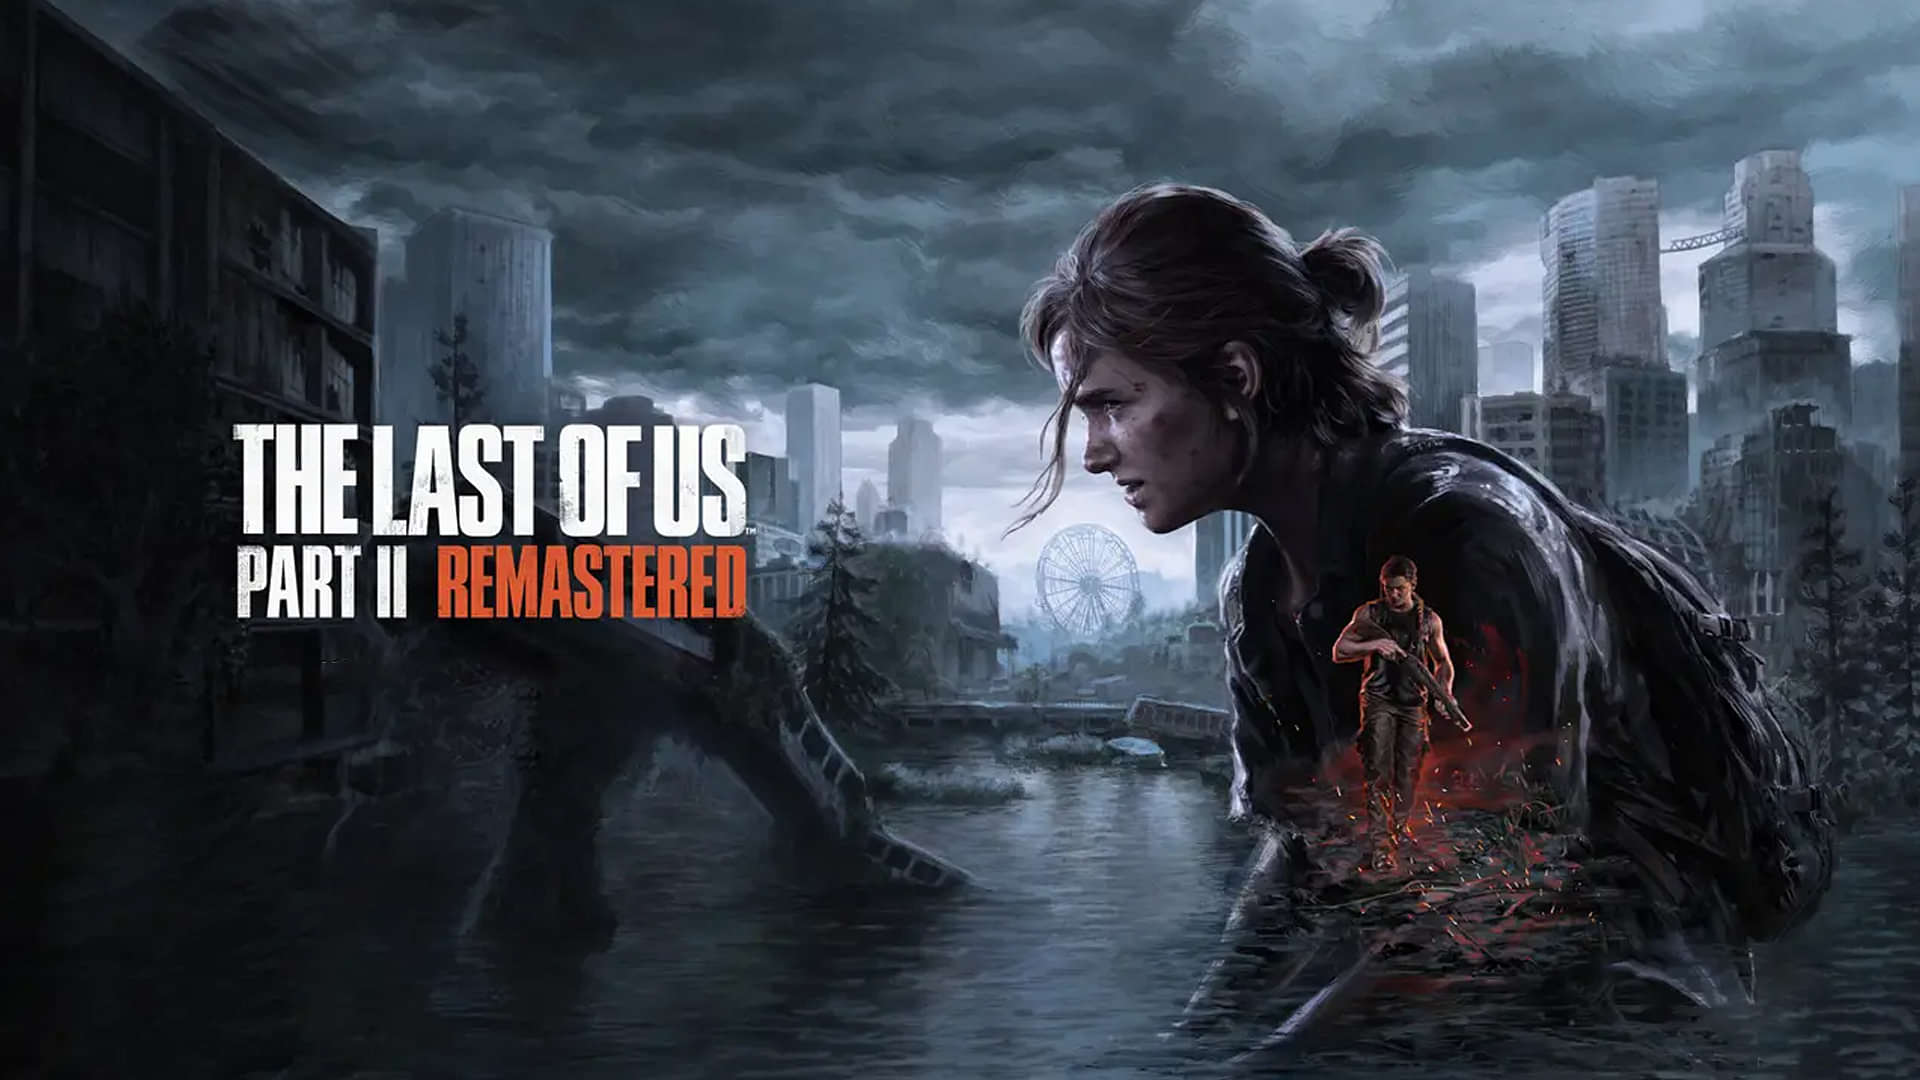 HBO's The Last of Us: Complete First Season Is Up for Preorder in